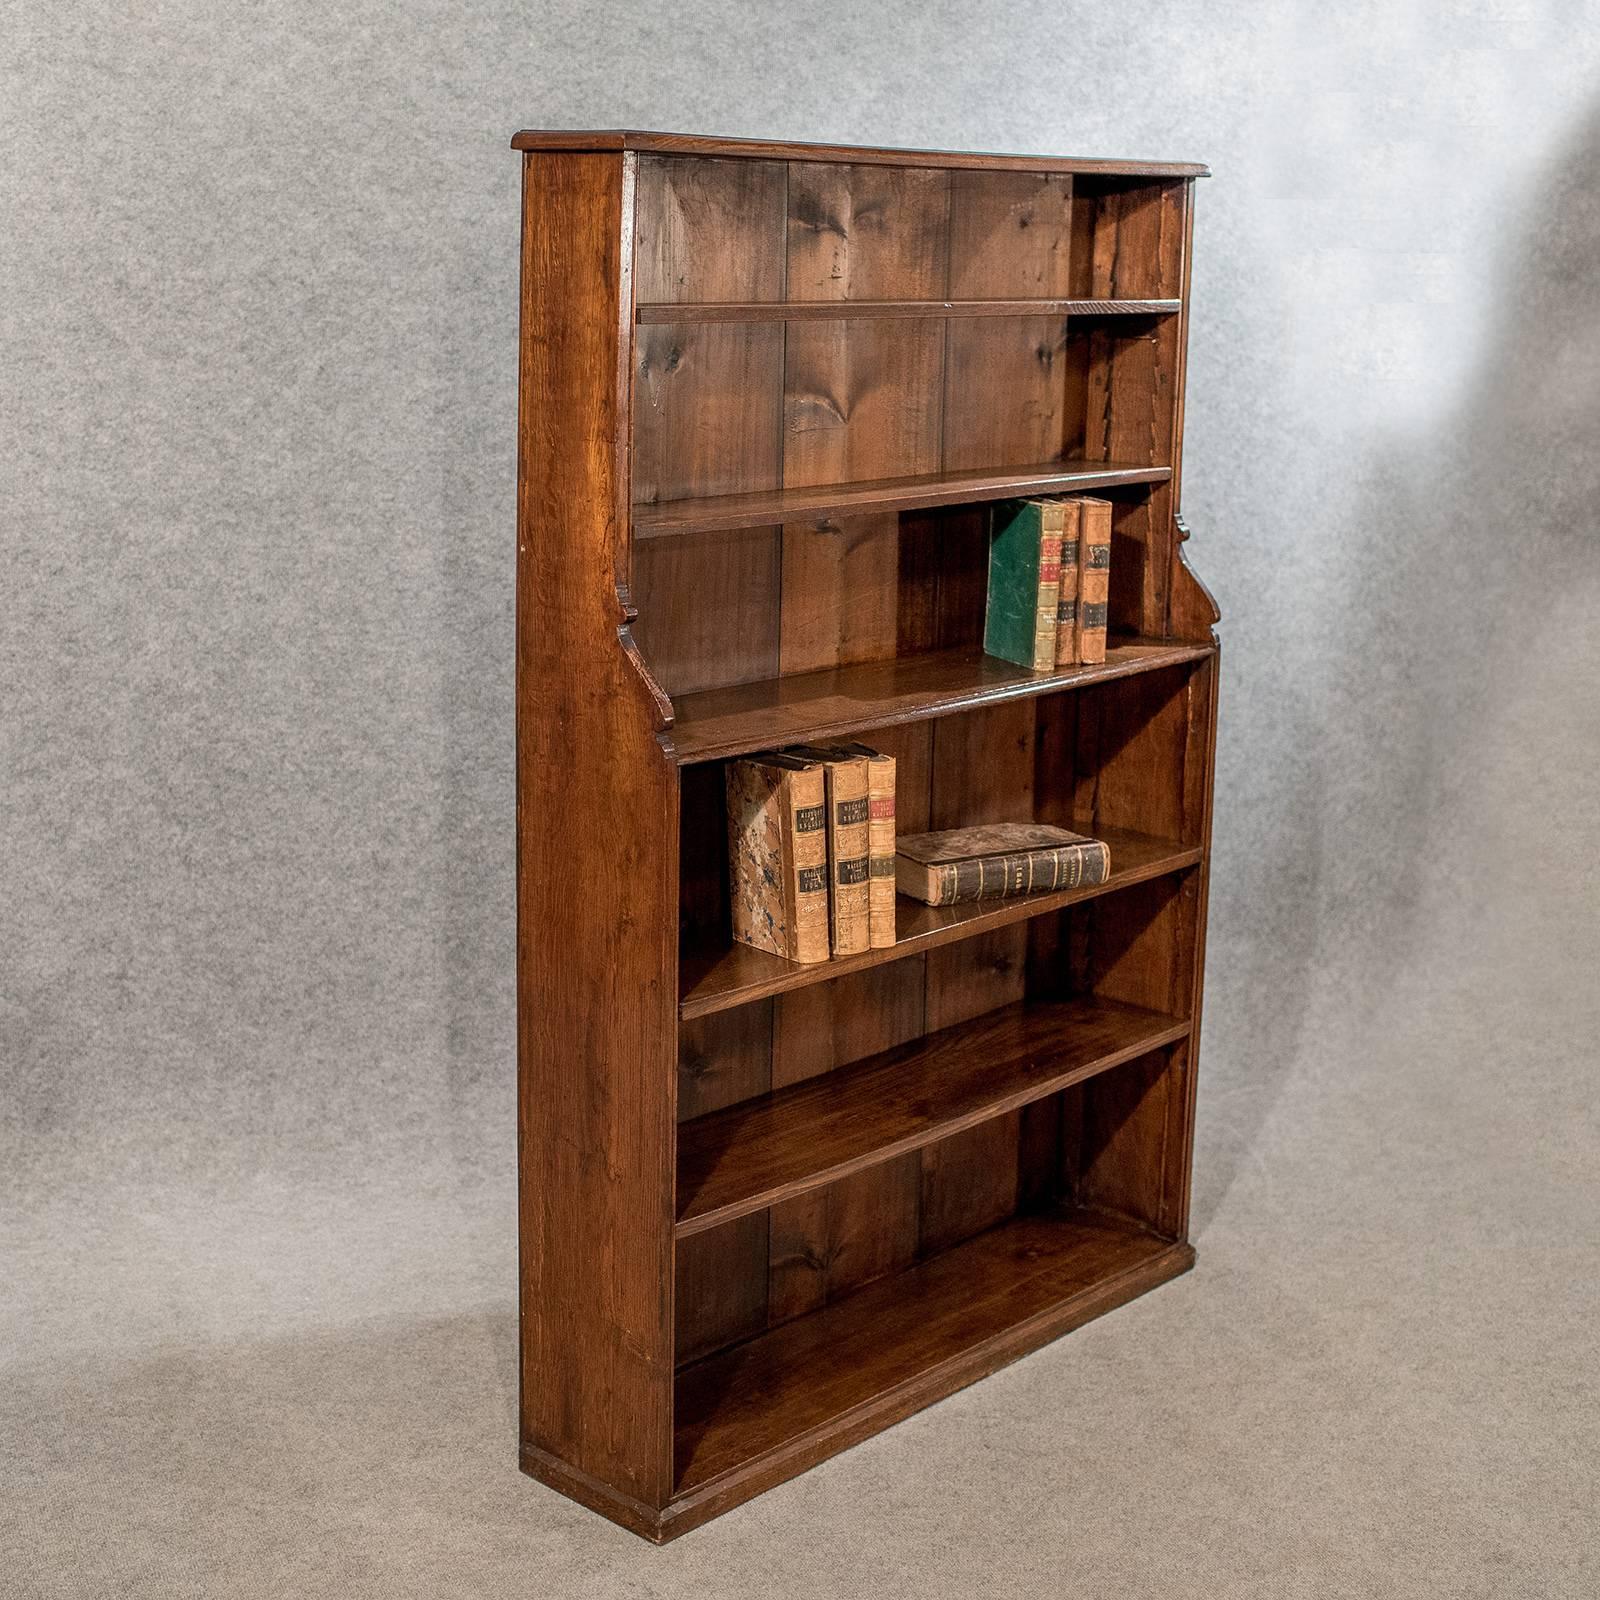 A mid-size and practical open bookcase display shelves presented in good antique condition
In desirable oak with stained pine back-boards
Showing desirable tone and fine quality graining
Rising through a deep base stepping into a narrower upper